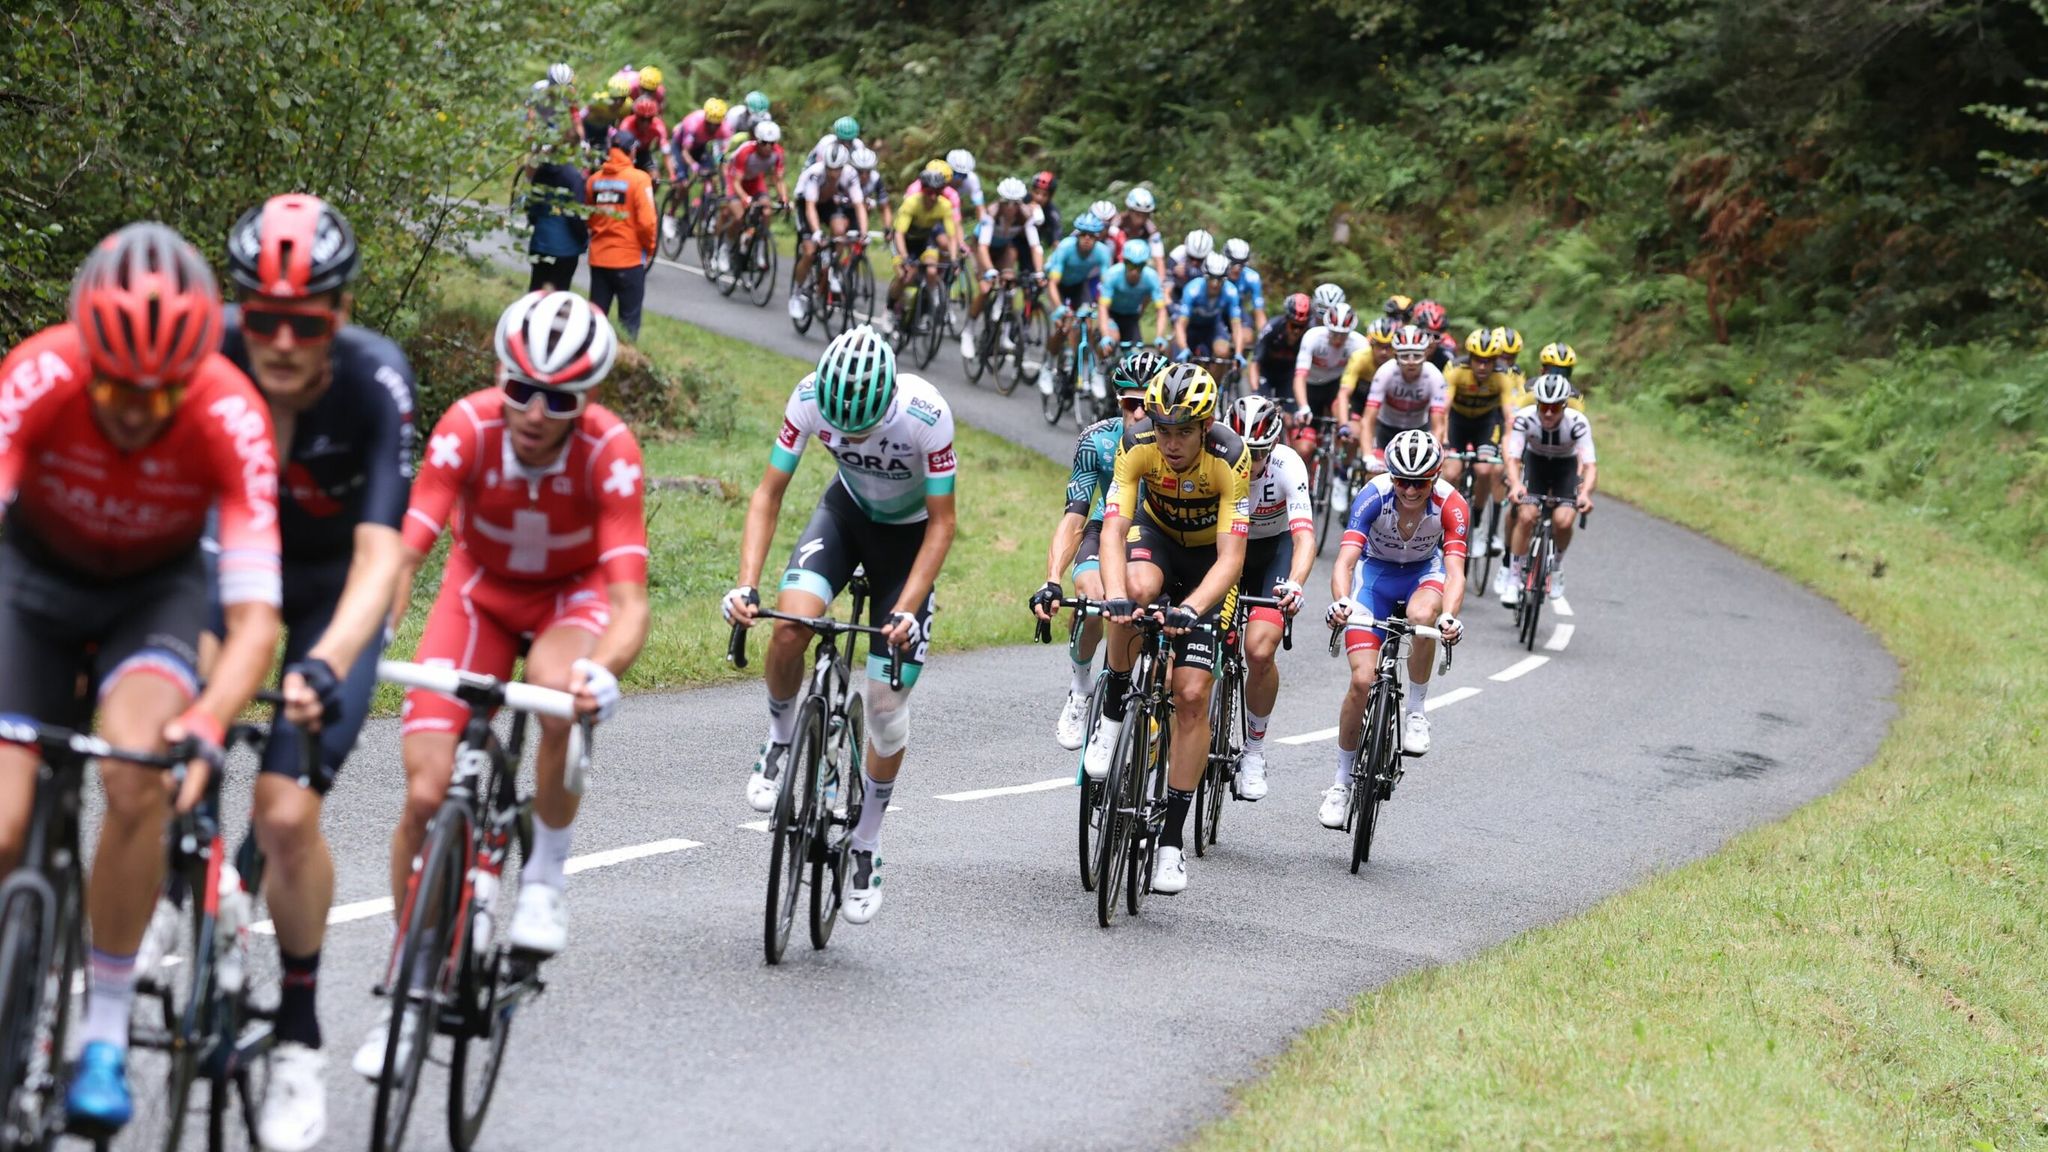 Tour de France confirm no spectators at stage finishes through coronavirus 'red zones'